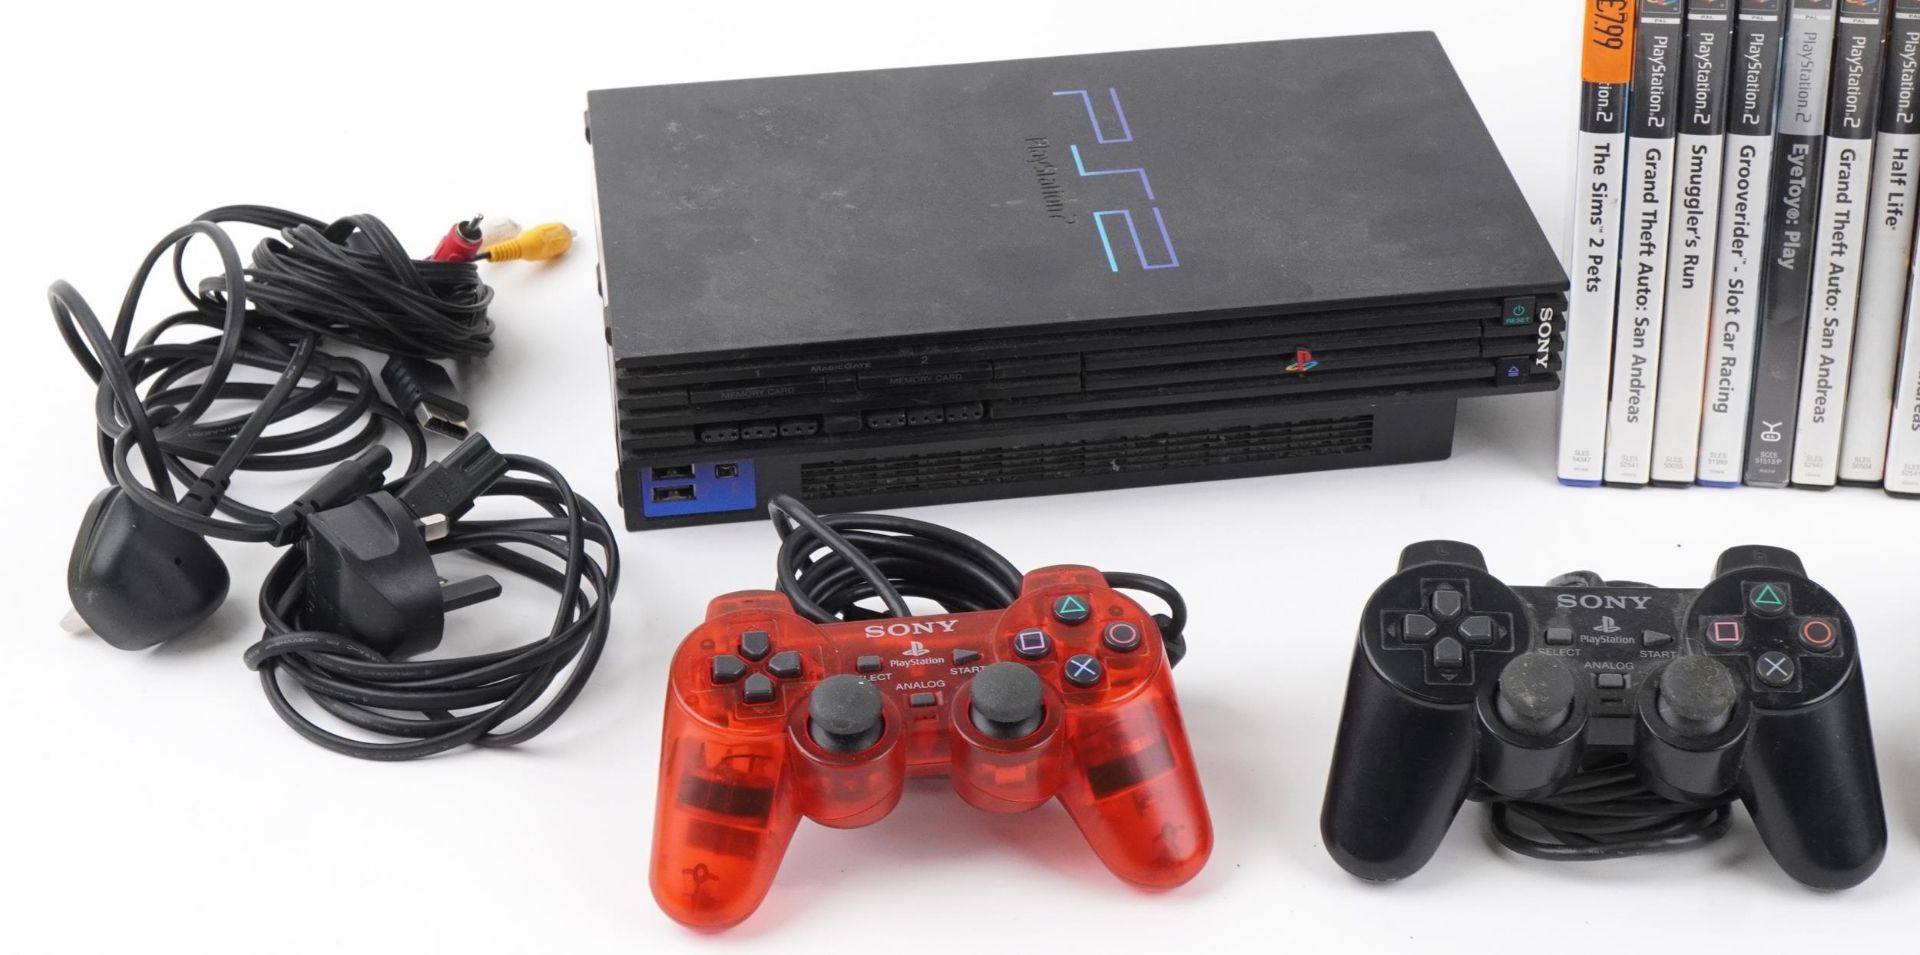 Two Sony PlayStation 2 games consoles with controllers and a collection of games : For further - Image 2 of 4